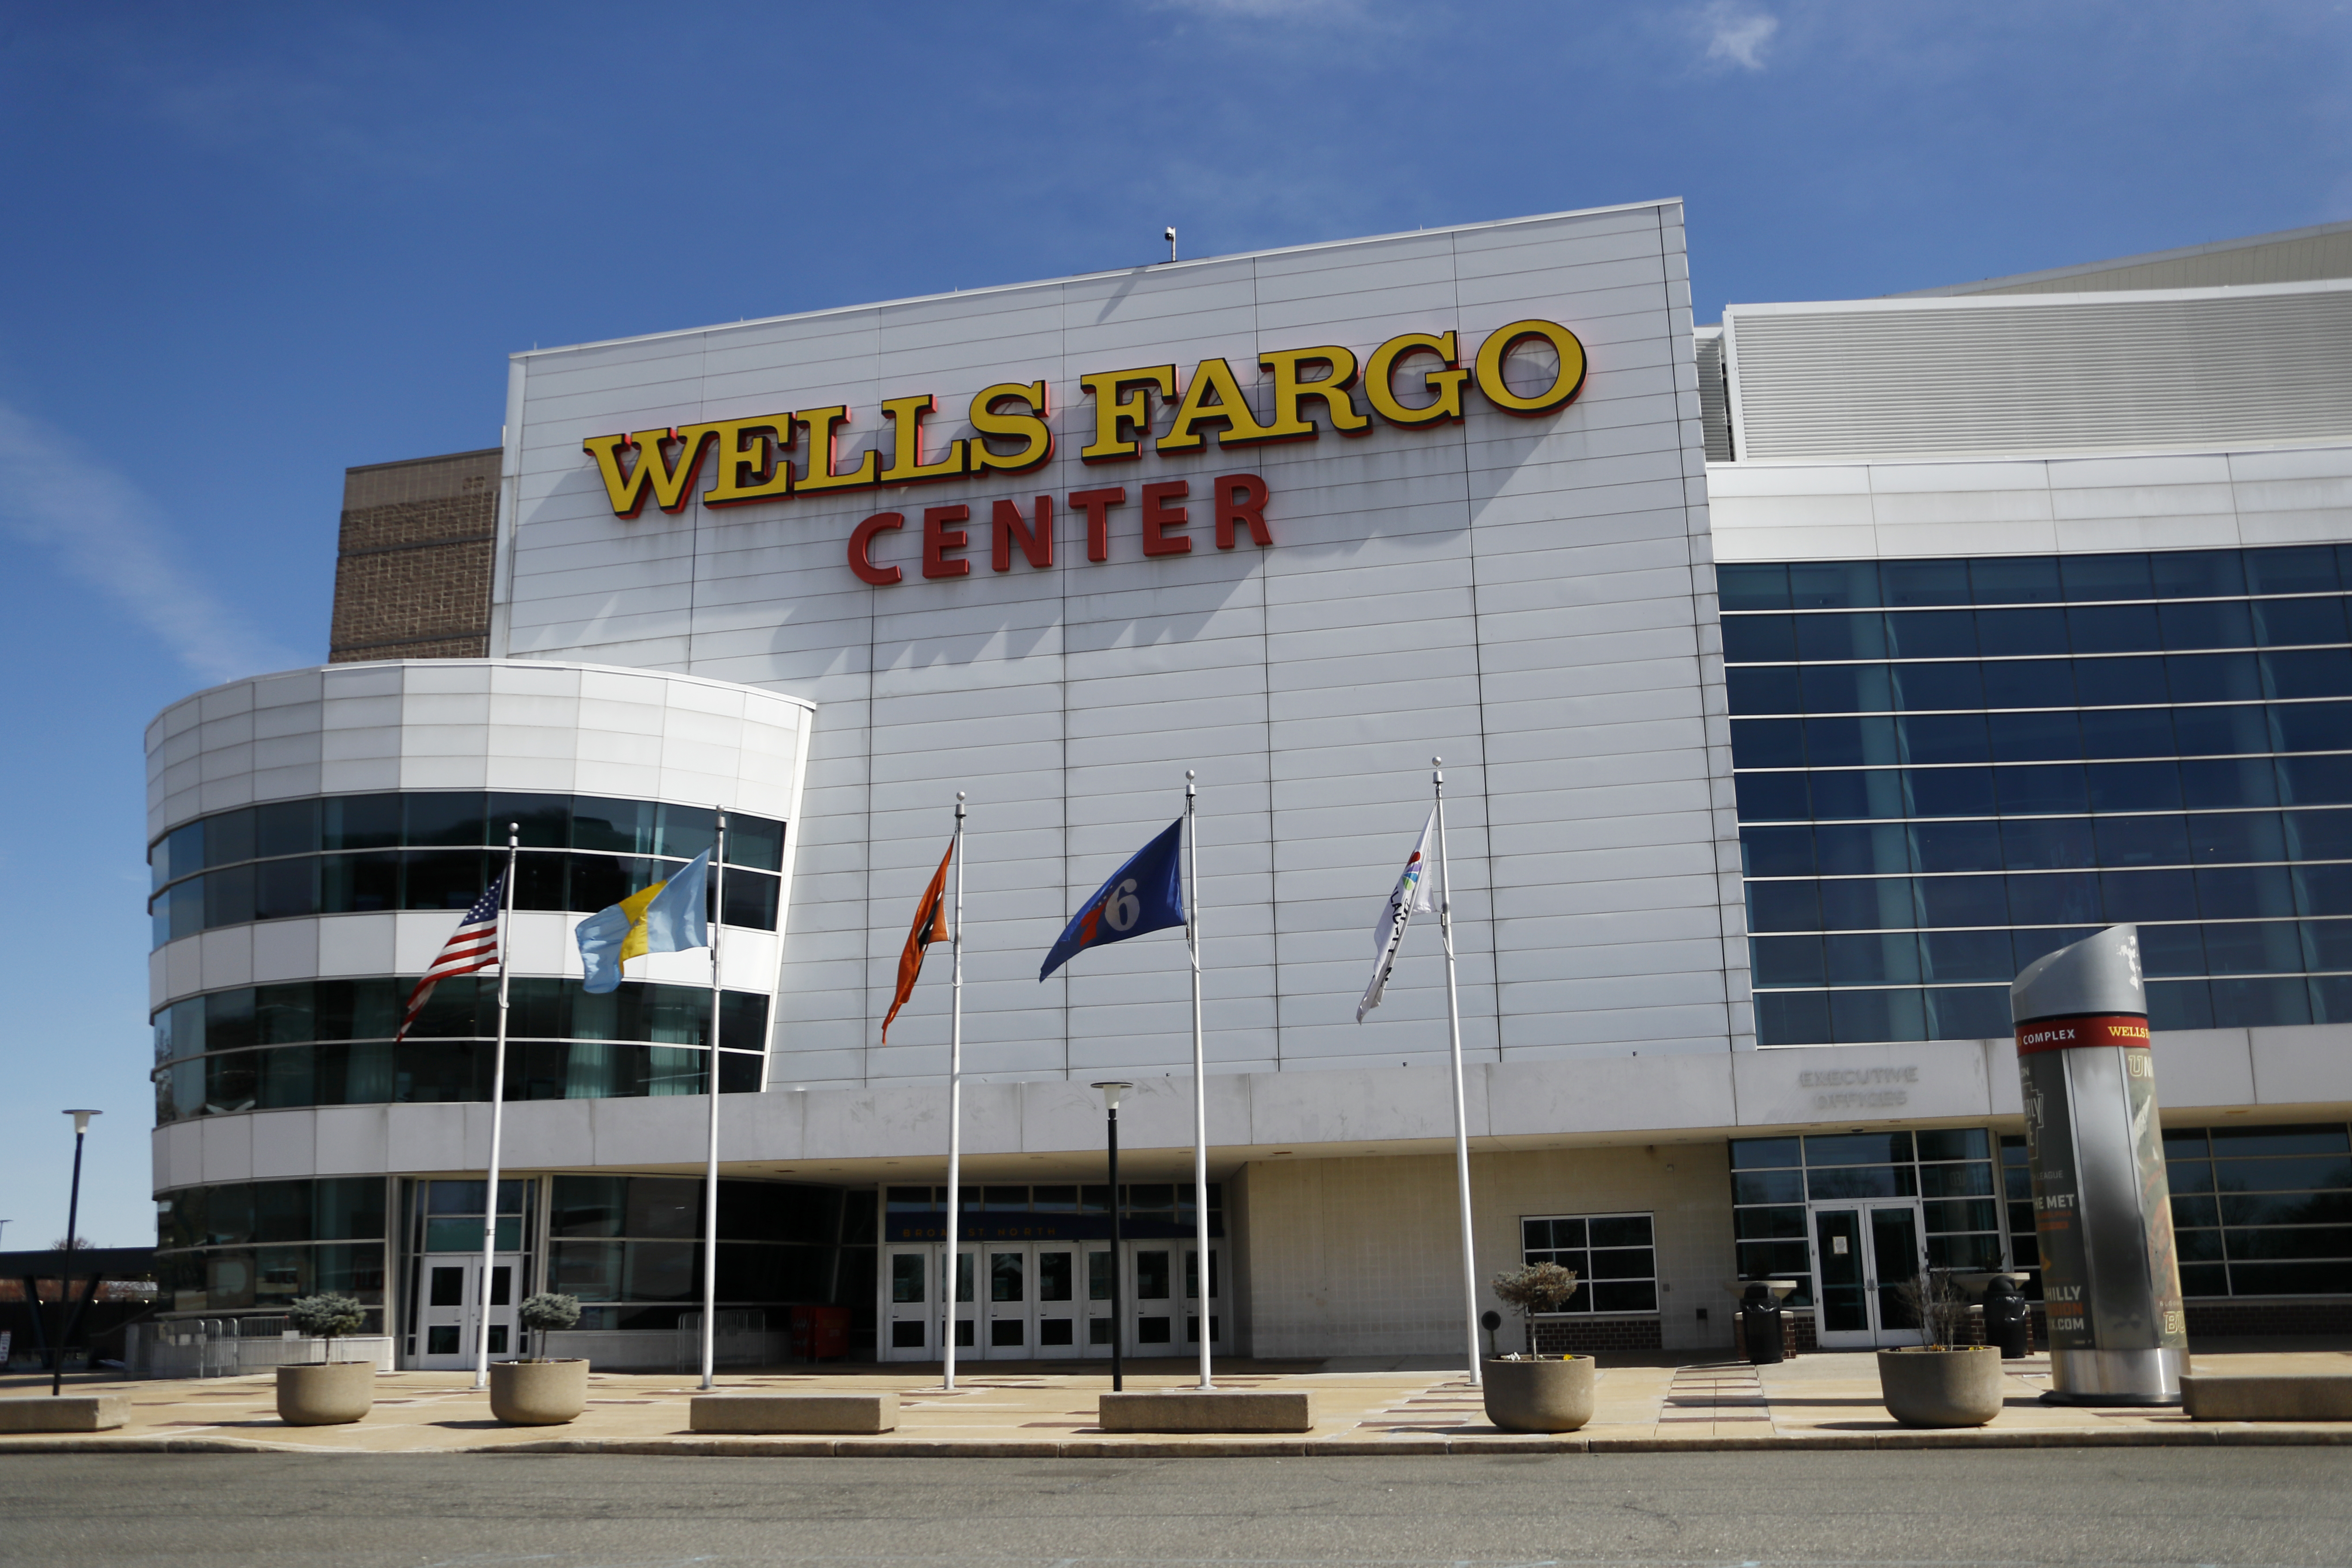 Wells Fargo Center reserved all lots for Flyers game tomorrow and